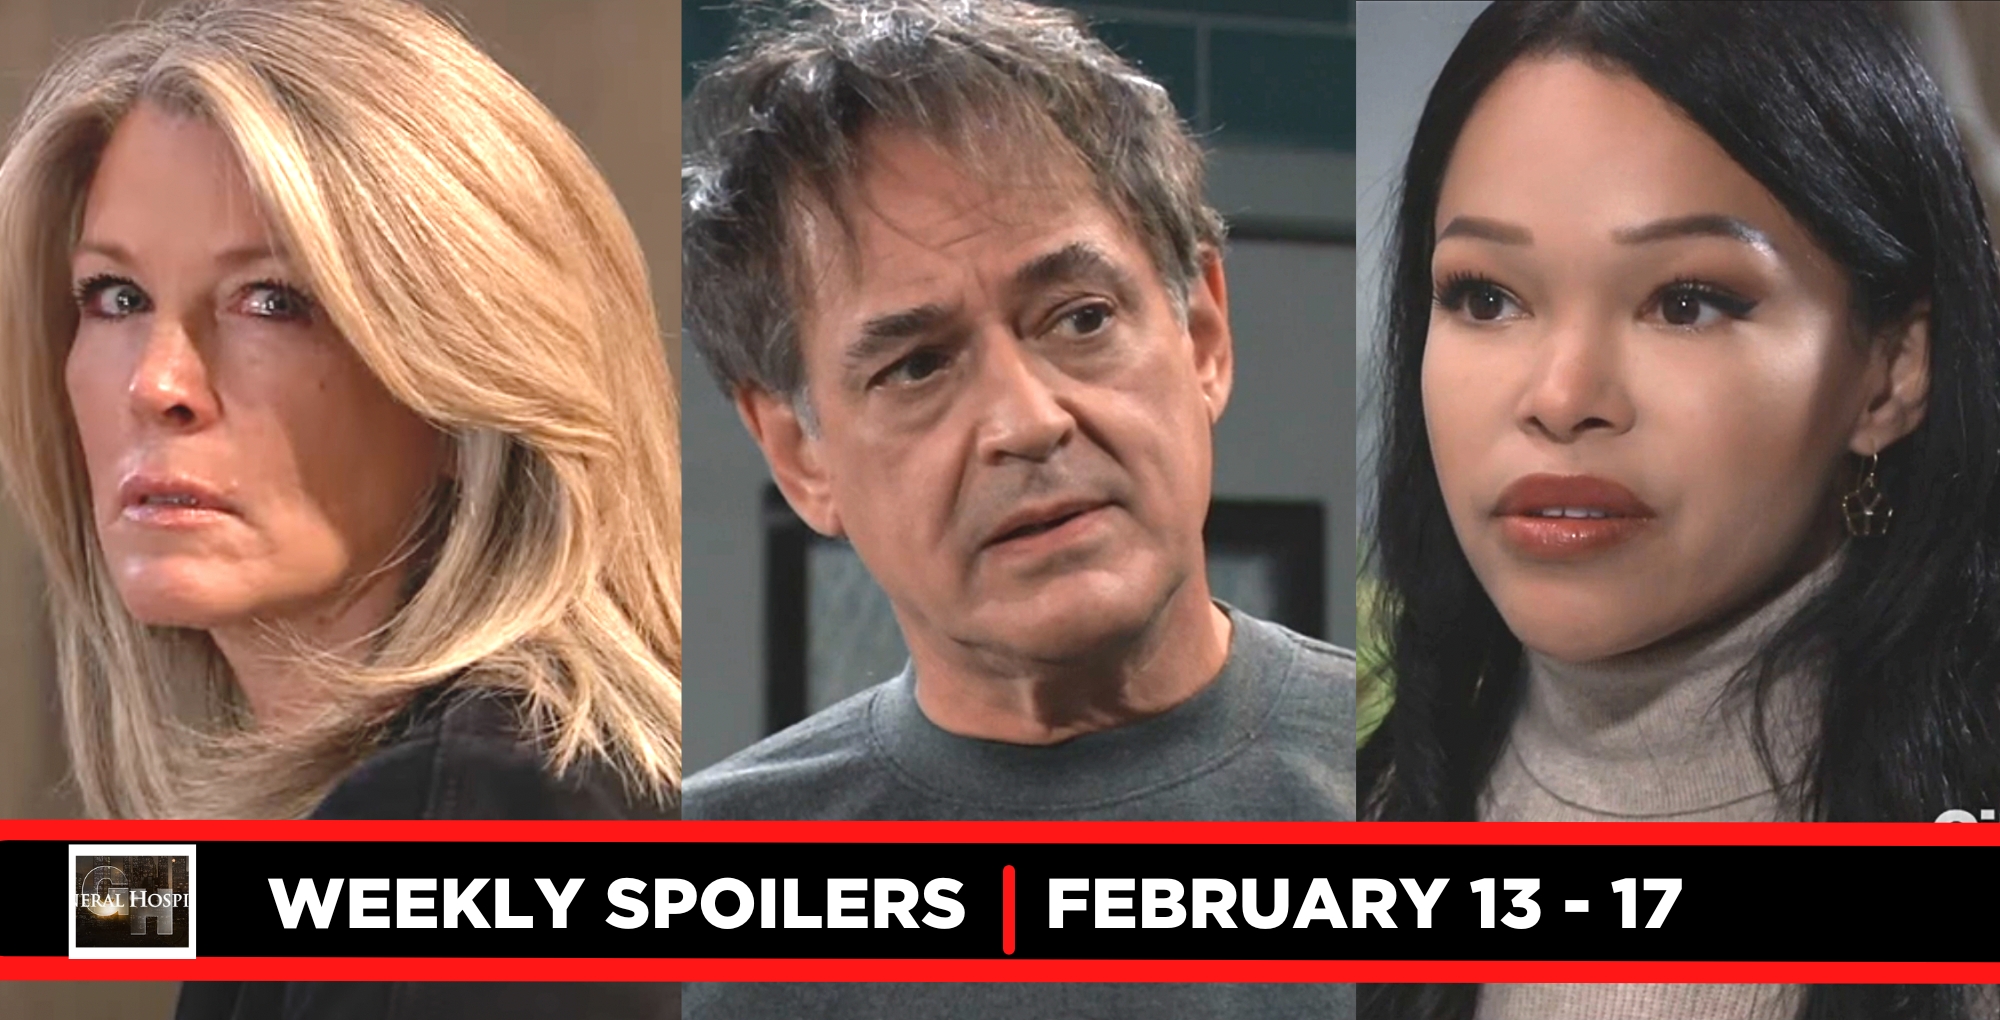 weekly general hospital spoilers three images, carly, ryan, and portia